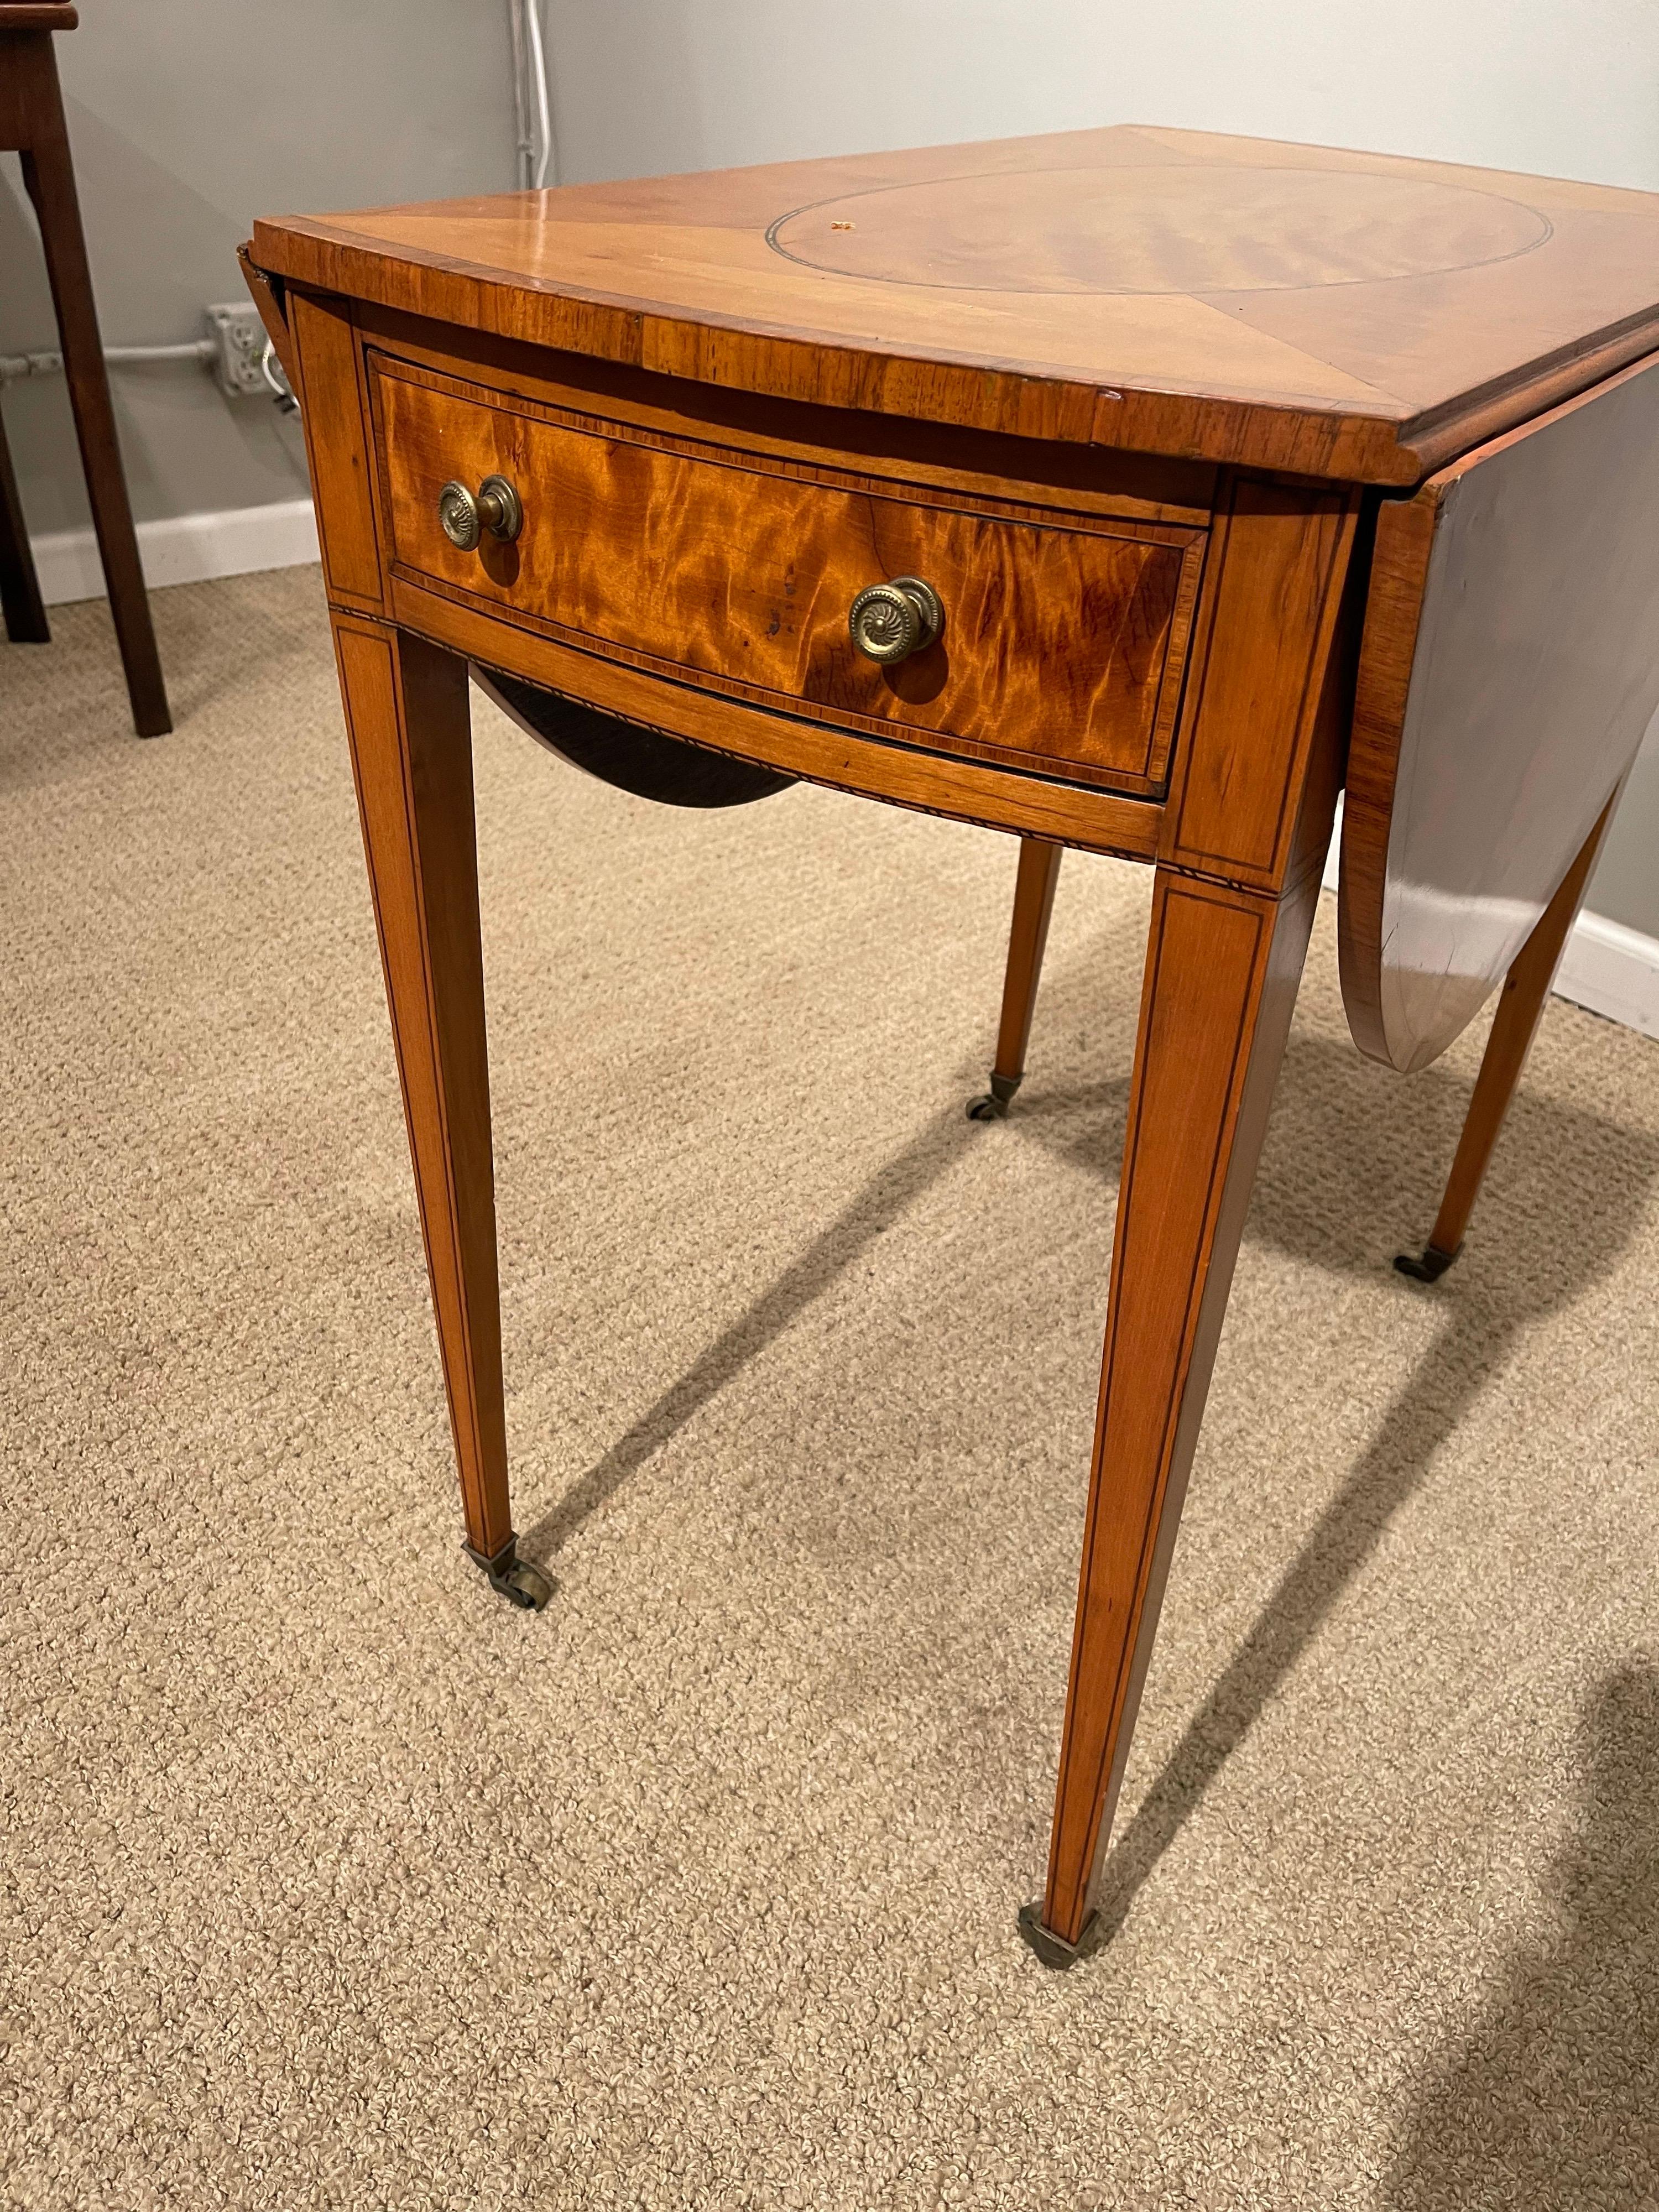 Oval Sheraton Satinwood Pembroke Table, Circa 1790 In Good Condition For Sale In New York, NY